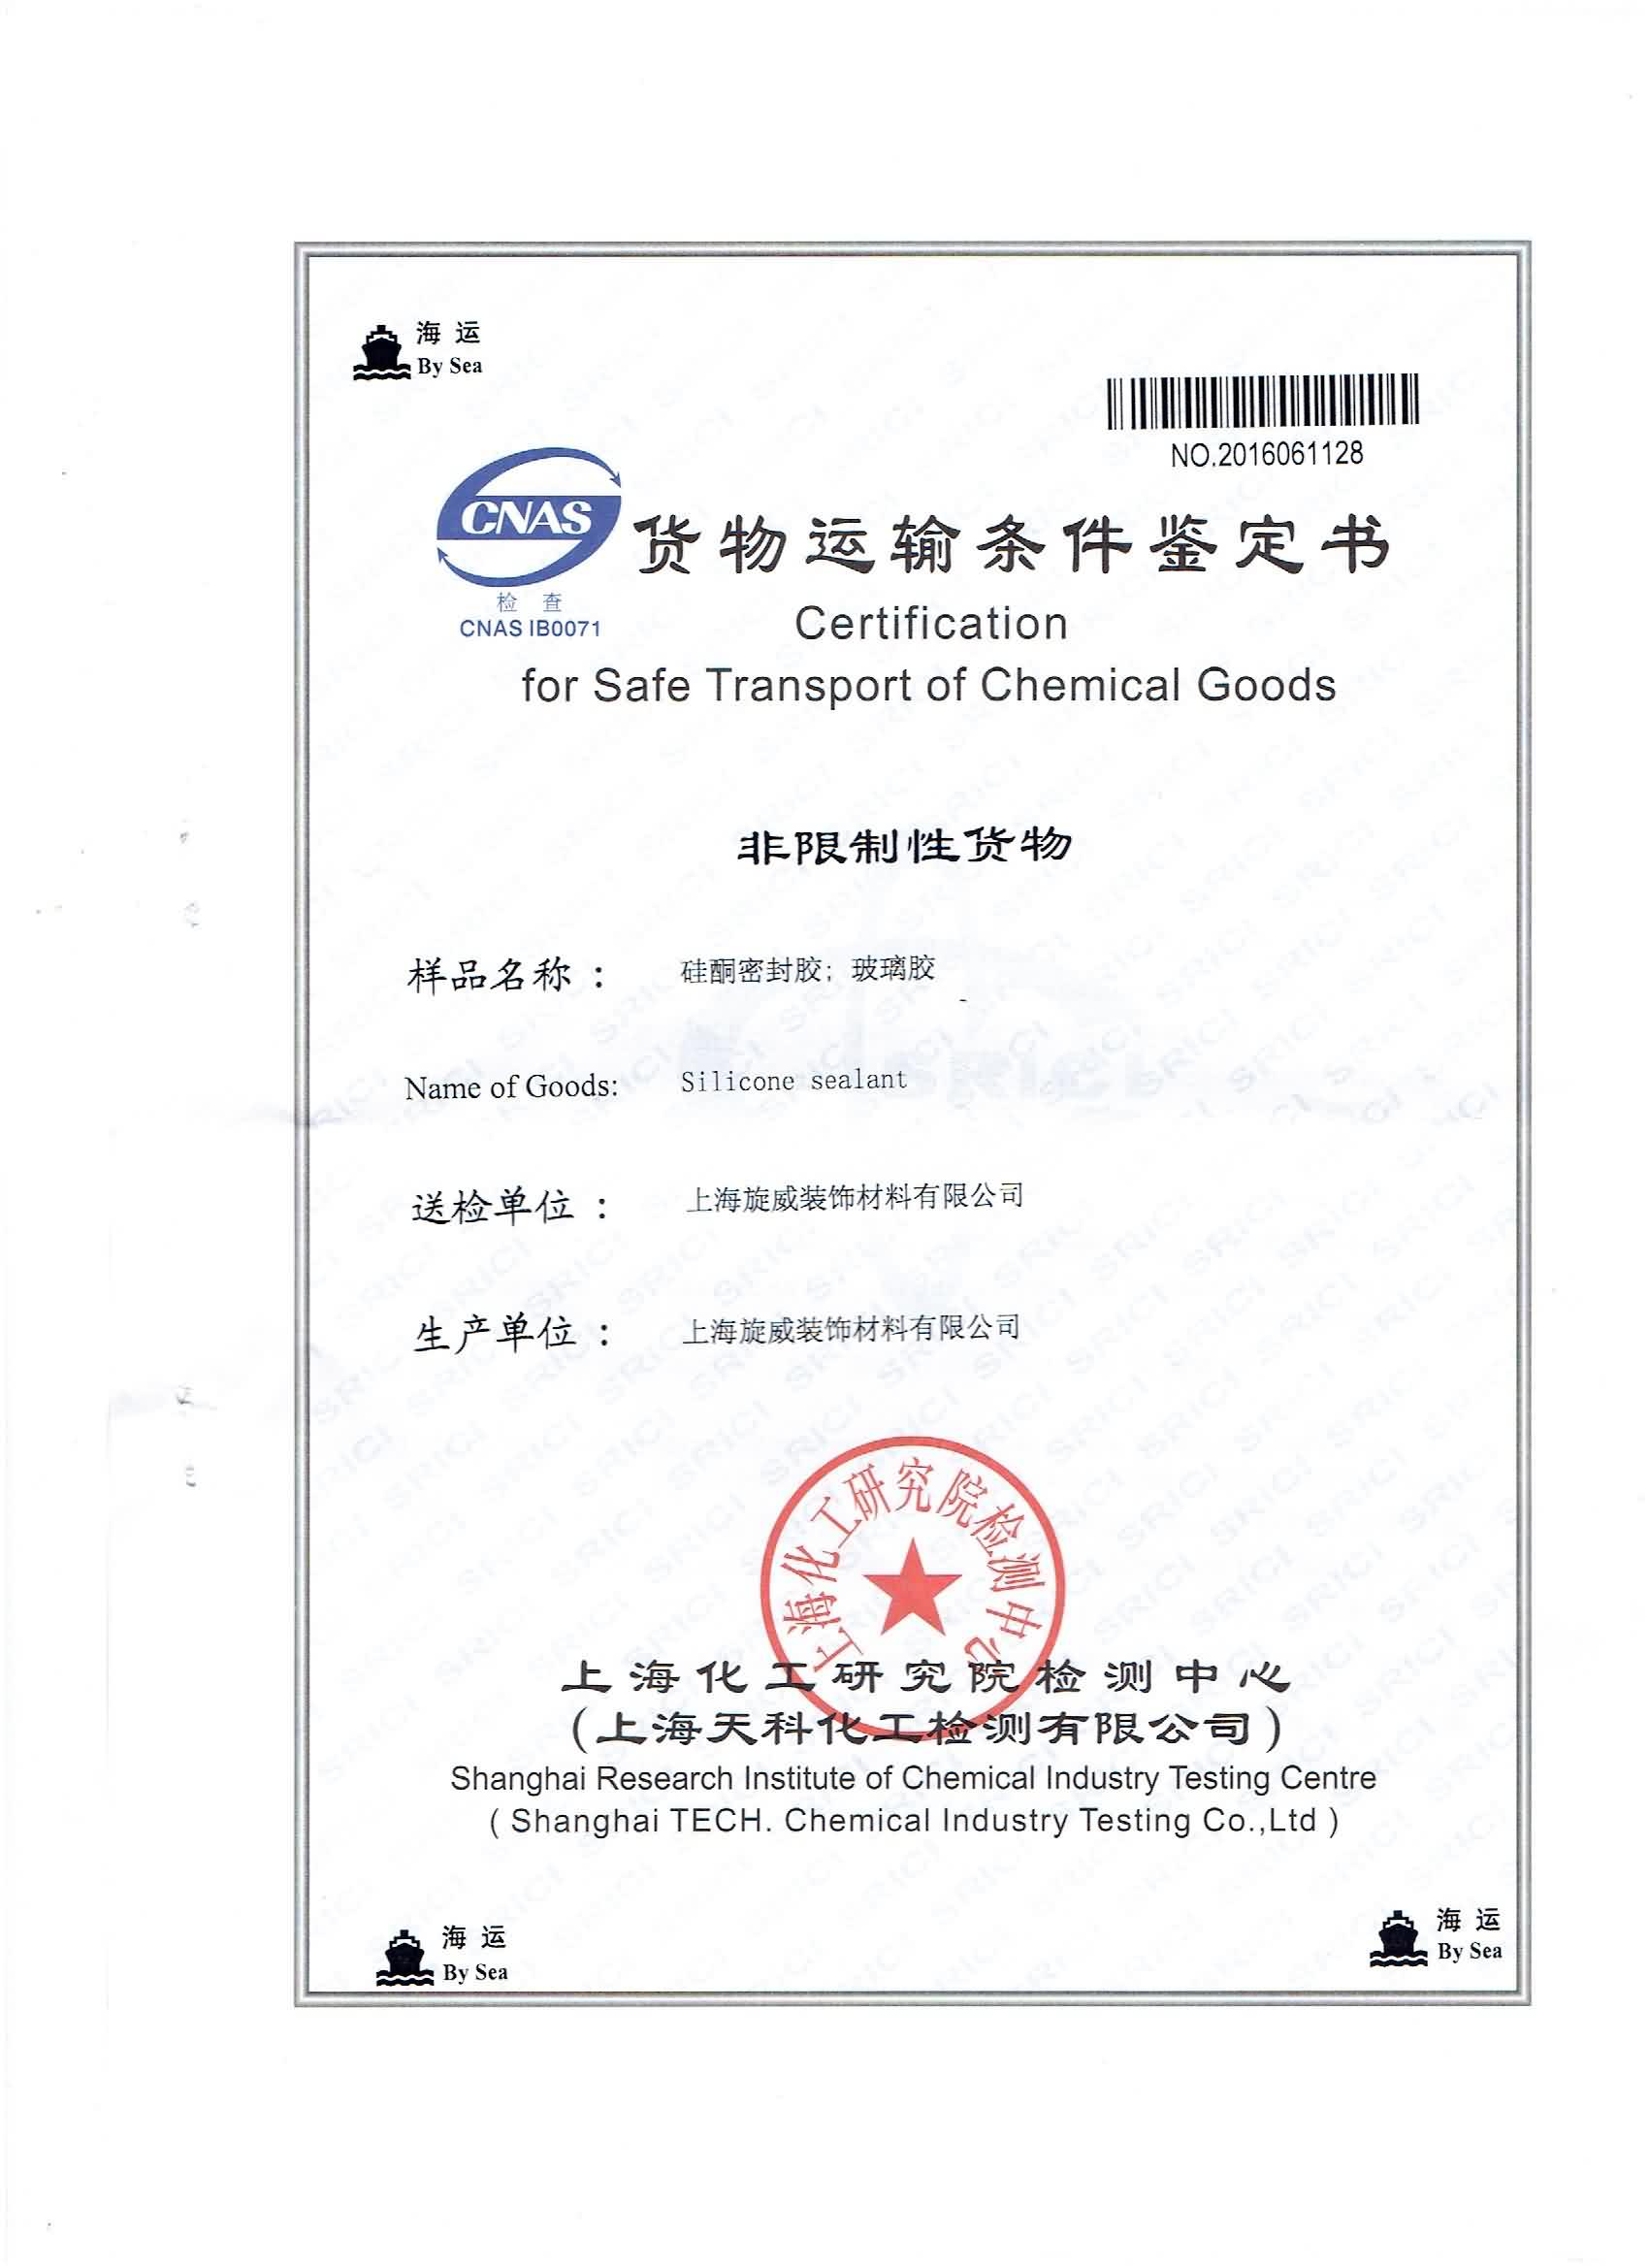 Certification for the Safe Transport of Chemical  Goods